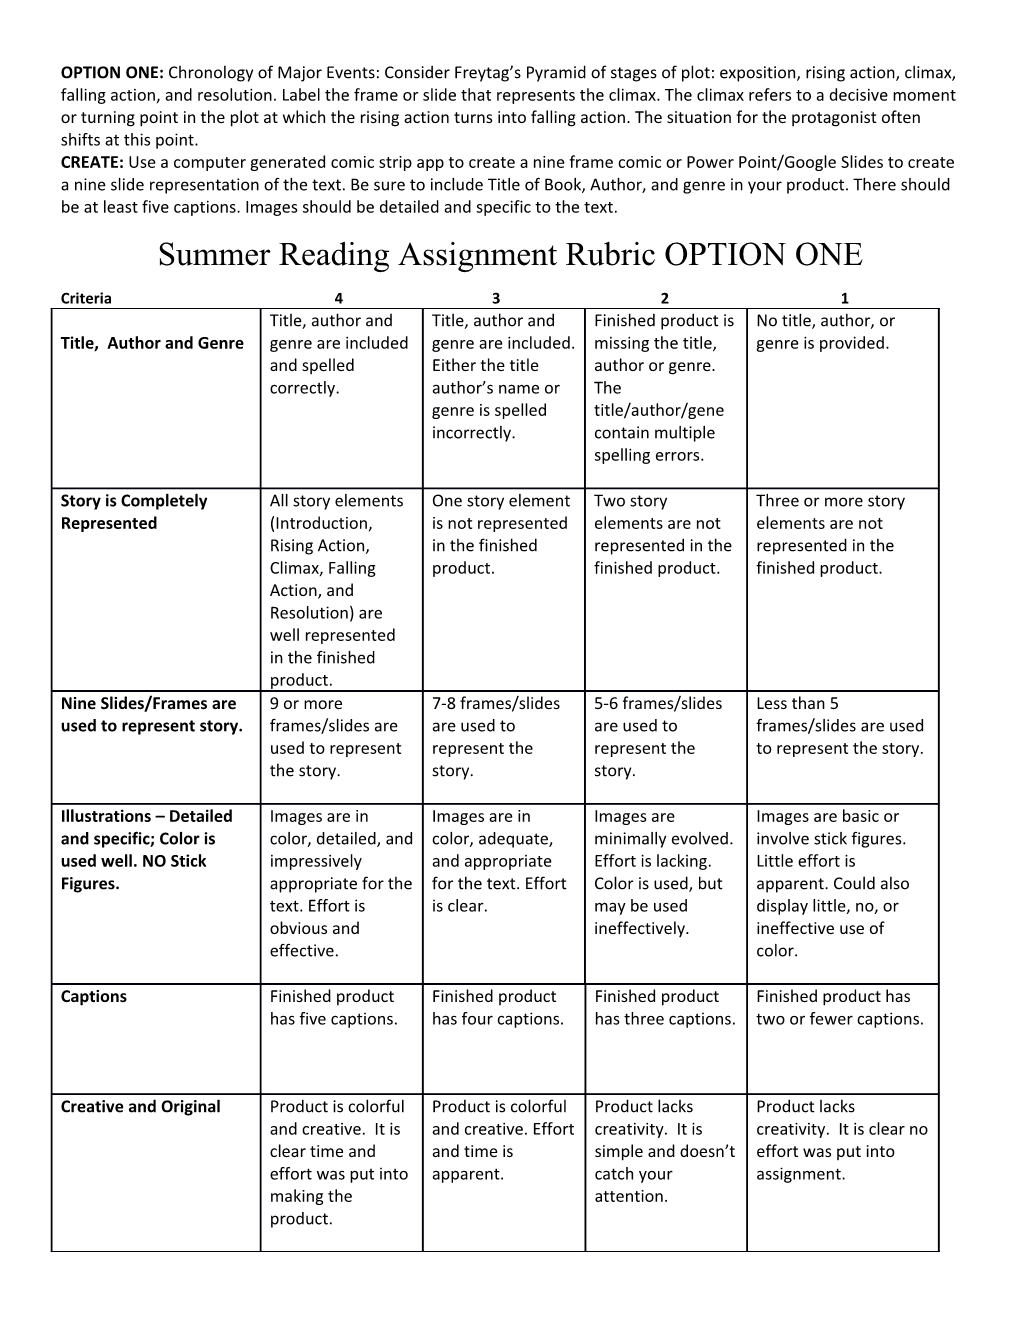 Summer Reading Assignment Rubric OPTION ONE